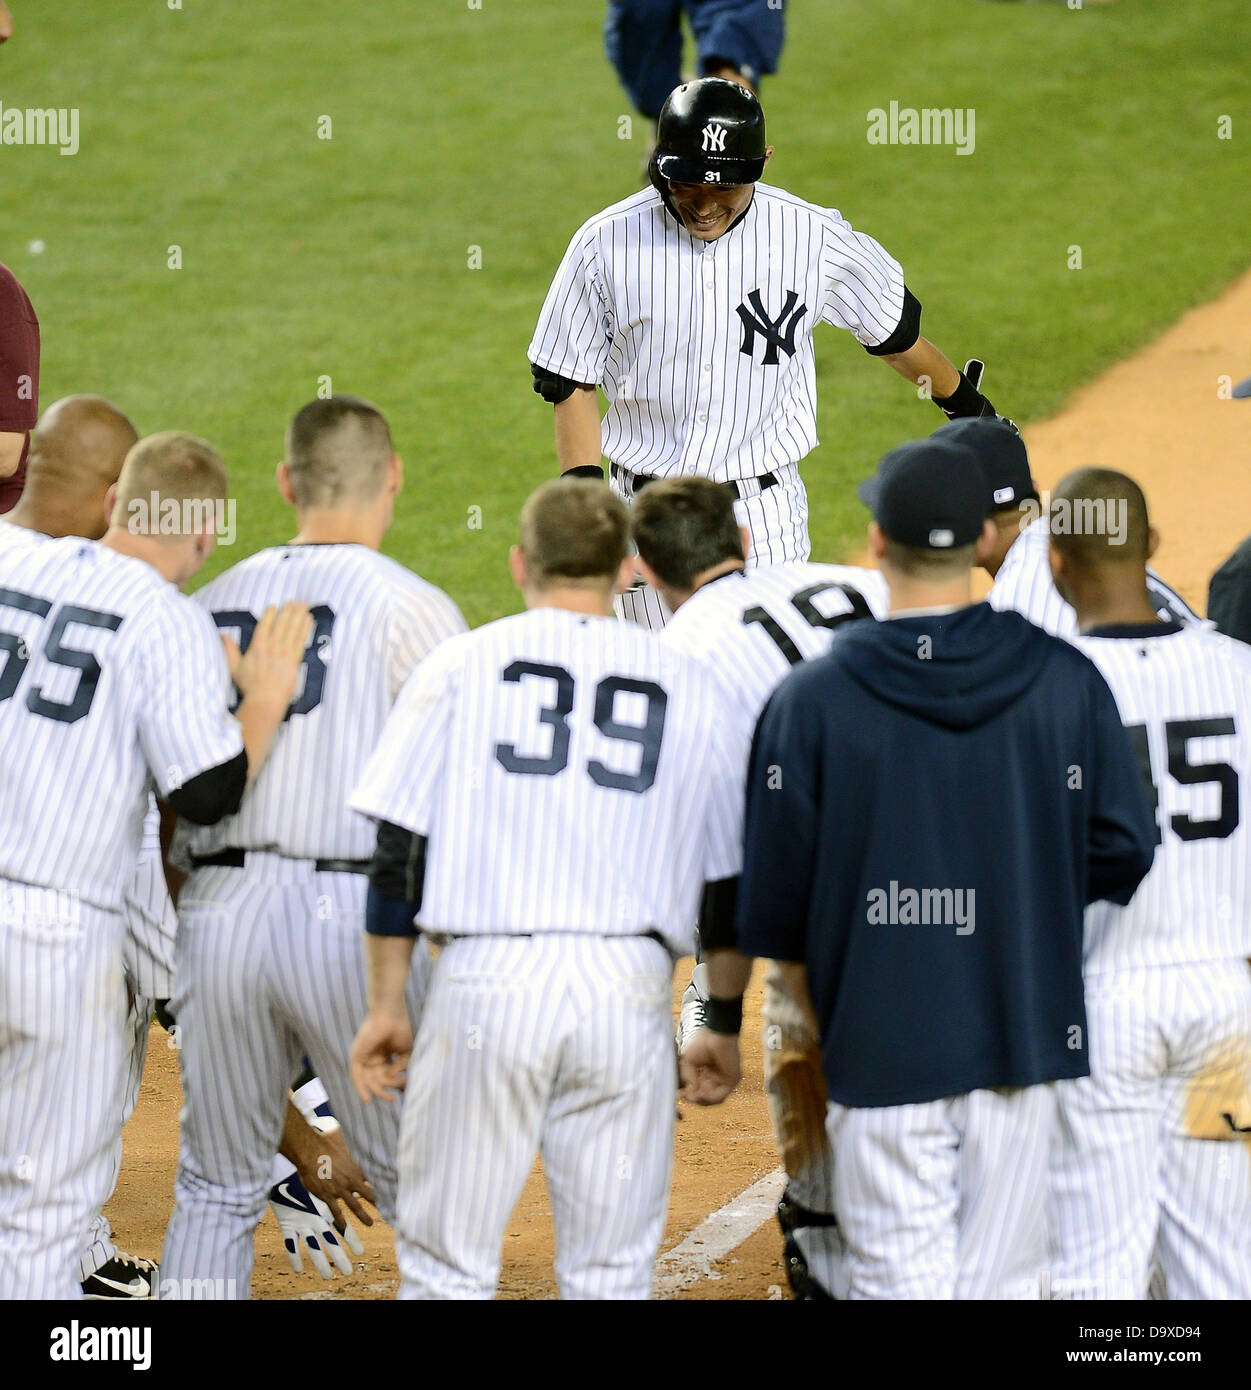 Ichiro Suzuki (Yankees), JUNE 25, 2013 - MLB : Ichiro Suzuki of the New York Yankees is greeted by his teammates at home plate after hitting a walk off home run in the ninth inning during the Major League Baseball game against the Texas Rangers at Yankee Stadium in The Bronx, New York, United States. (Photo by AFLO) Stock Photo